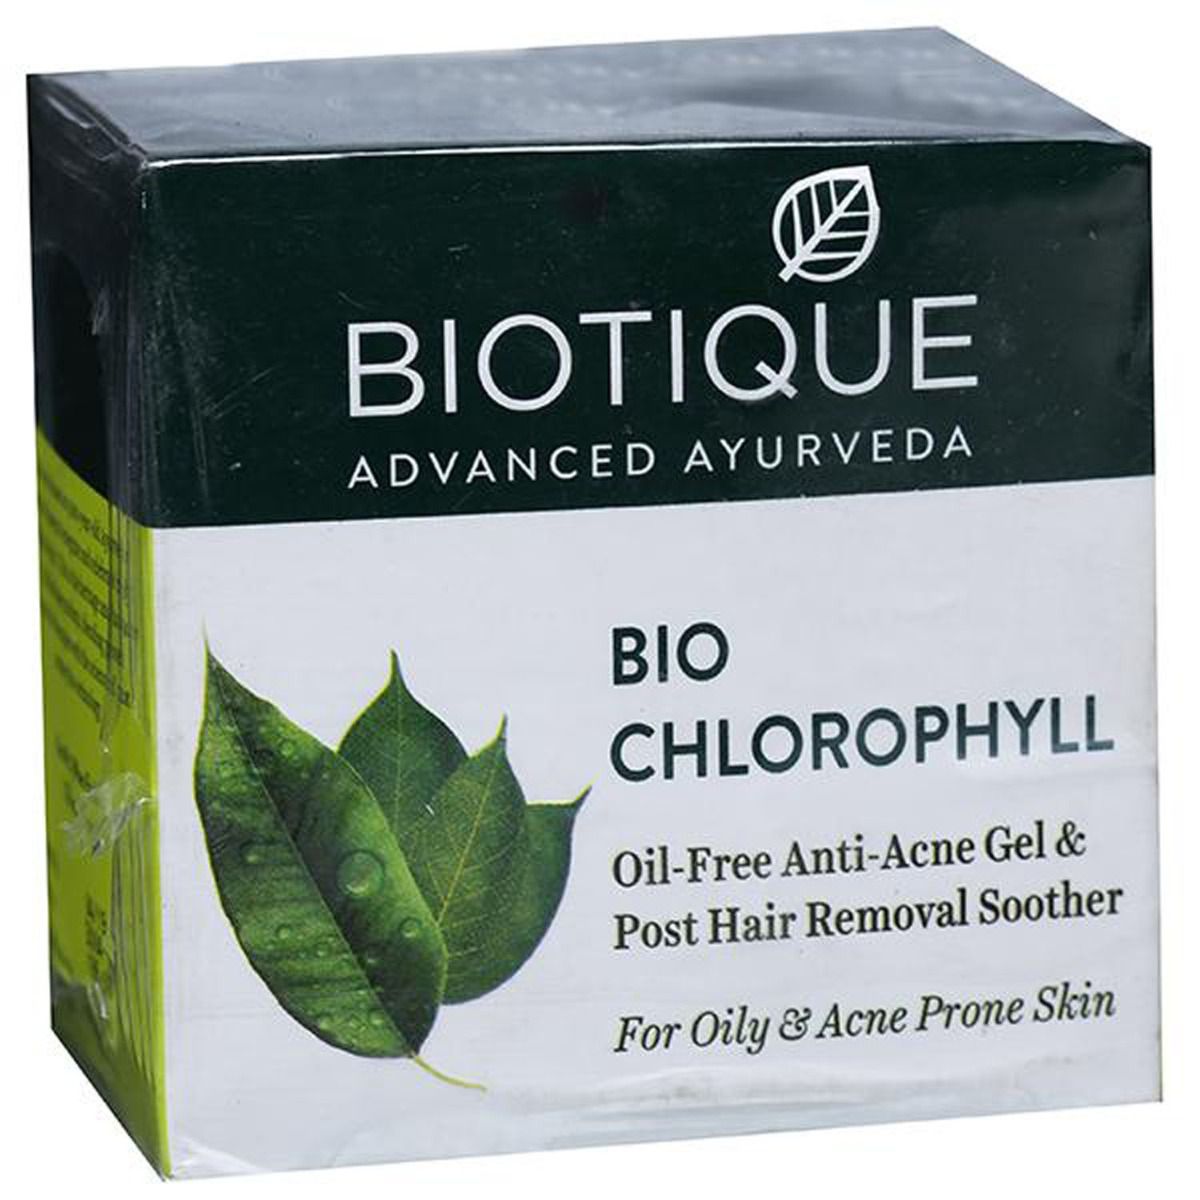 Biotique Bio Chlorophyll Oil Free Anti-Acne Gel, 50 gm Price, Uses, Side  Effects, Composition - Apollo Pharmacy